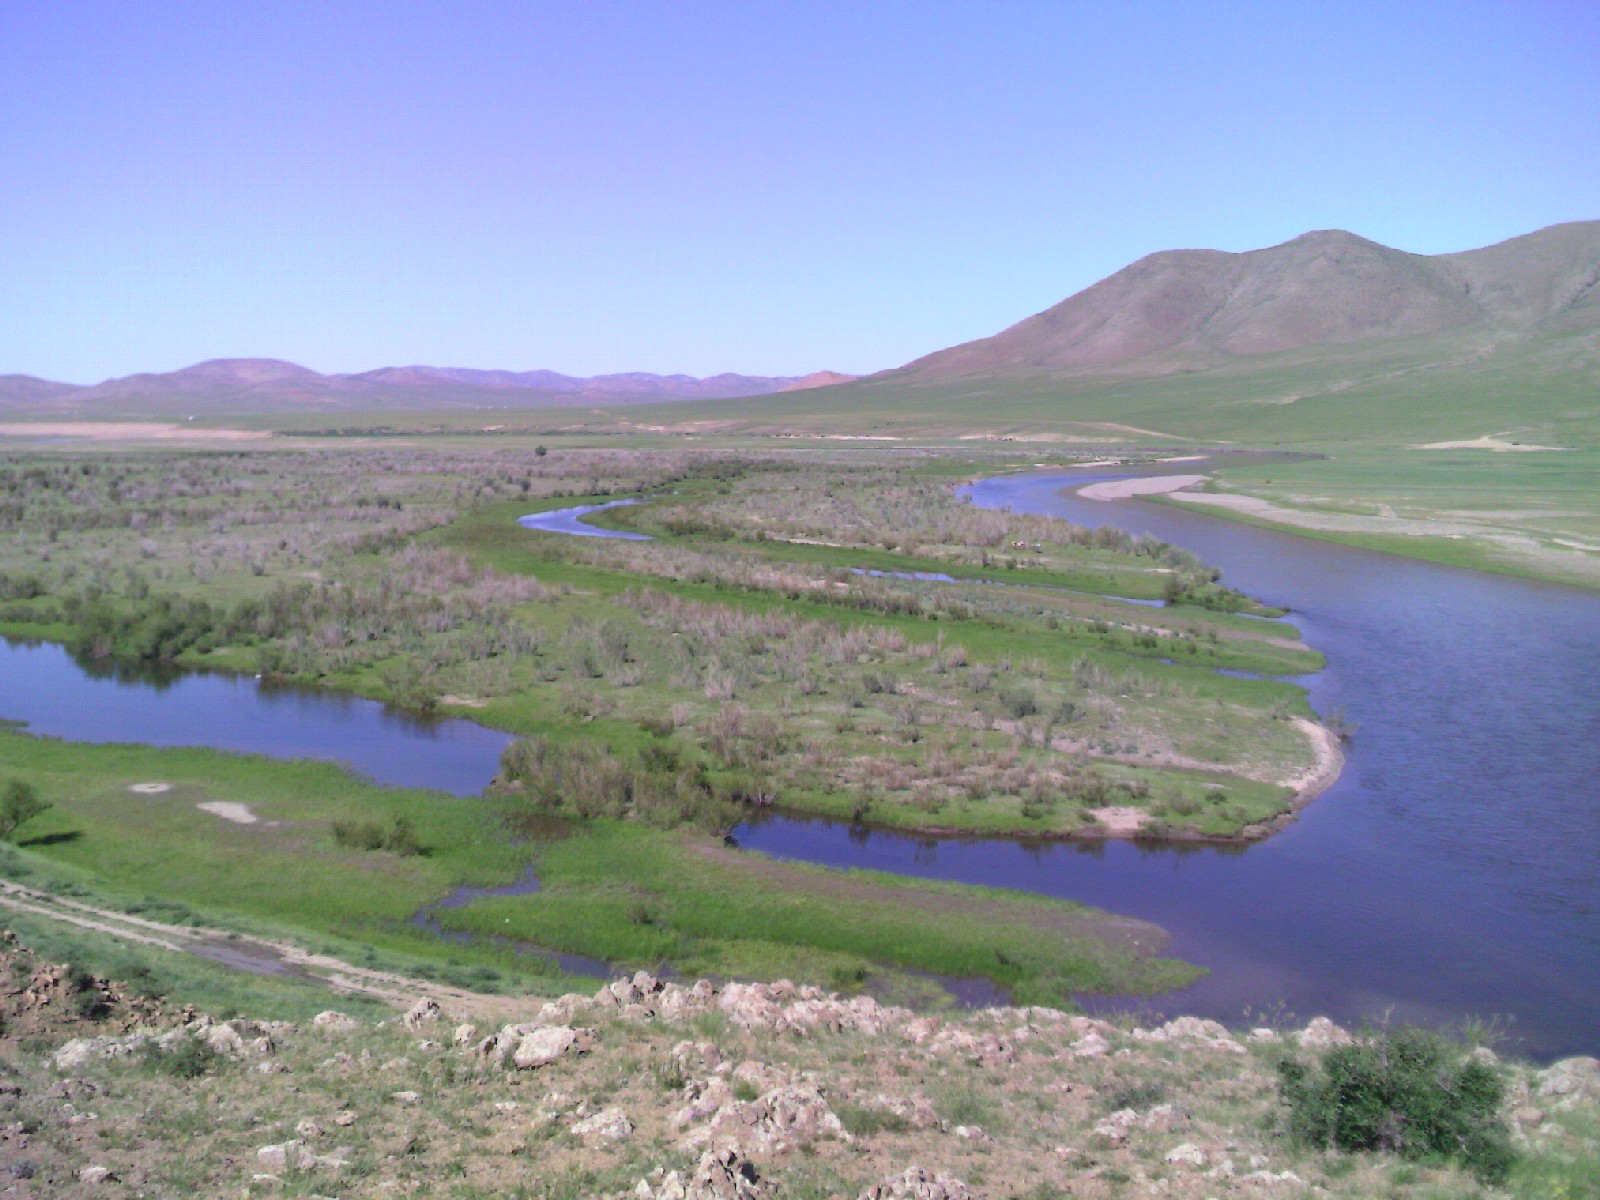 “Blue Horse” Project Seeks to Suck  Water from Kherlen and Orkhon Rivers